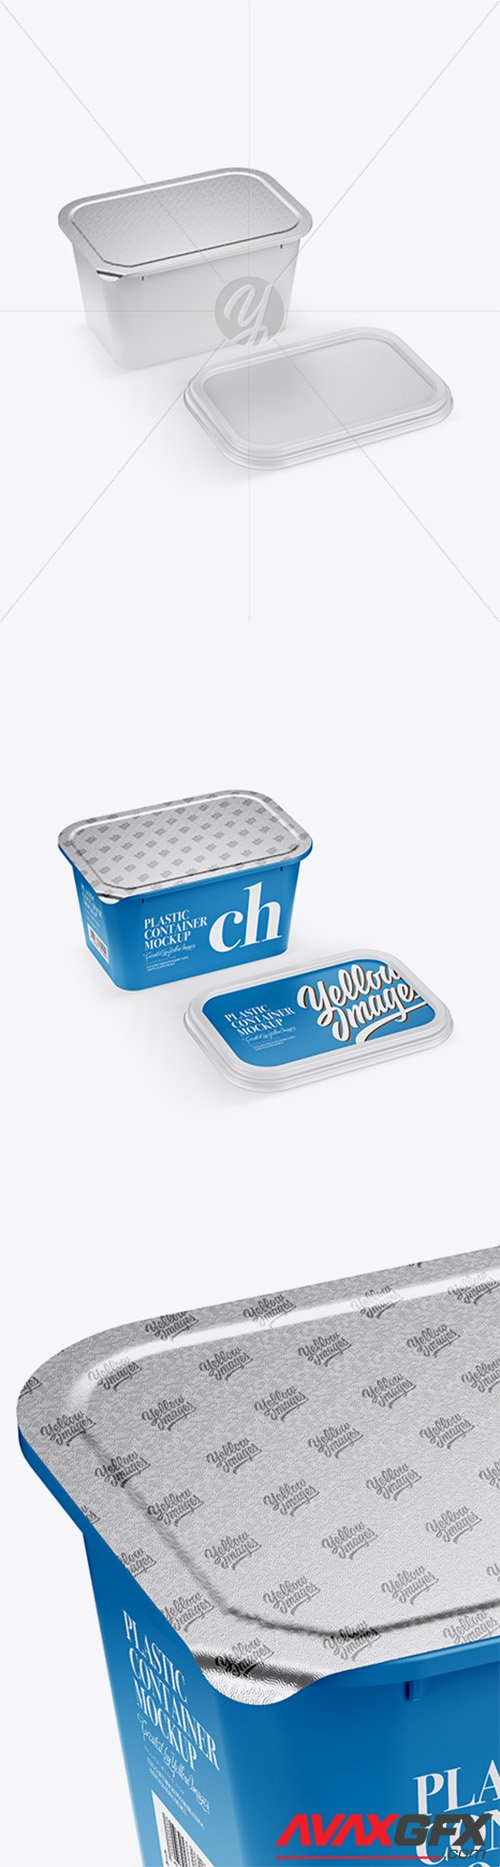 Opened Matte Plastic Container Mockup - Half Side View 20851